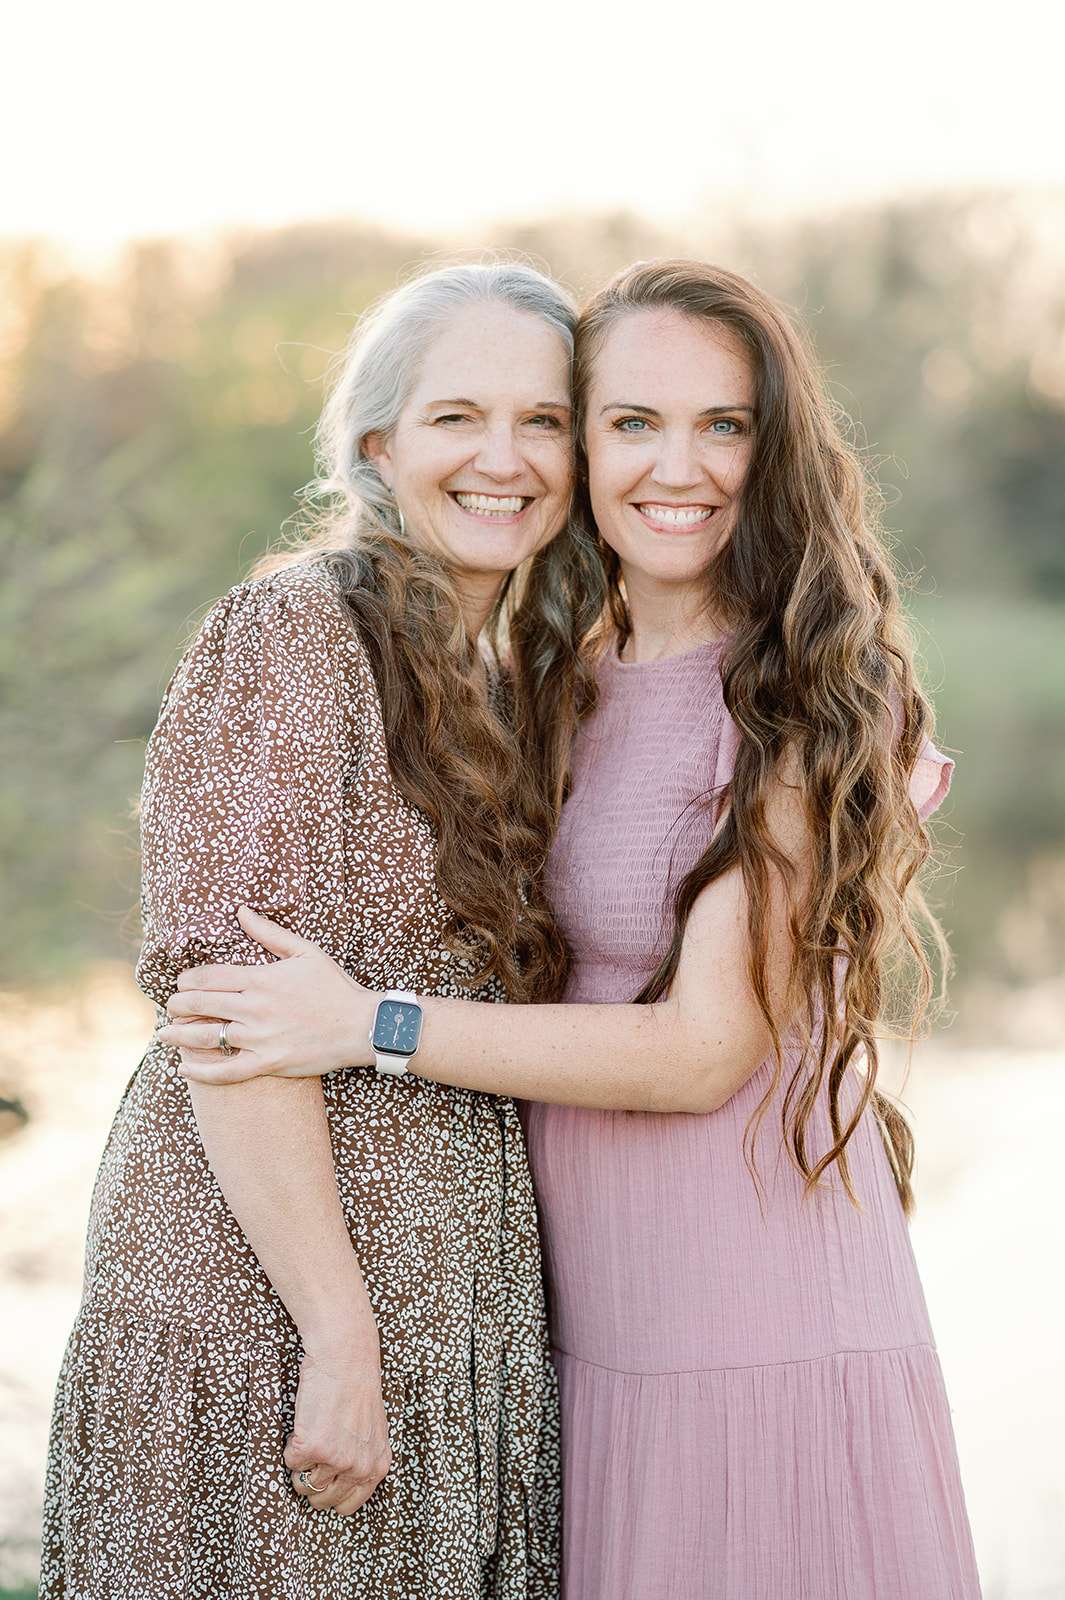 Sulphur Springs, TX Mother and Daughter photo session featuring photography by Candace Pair Photography;